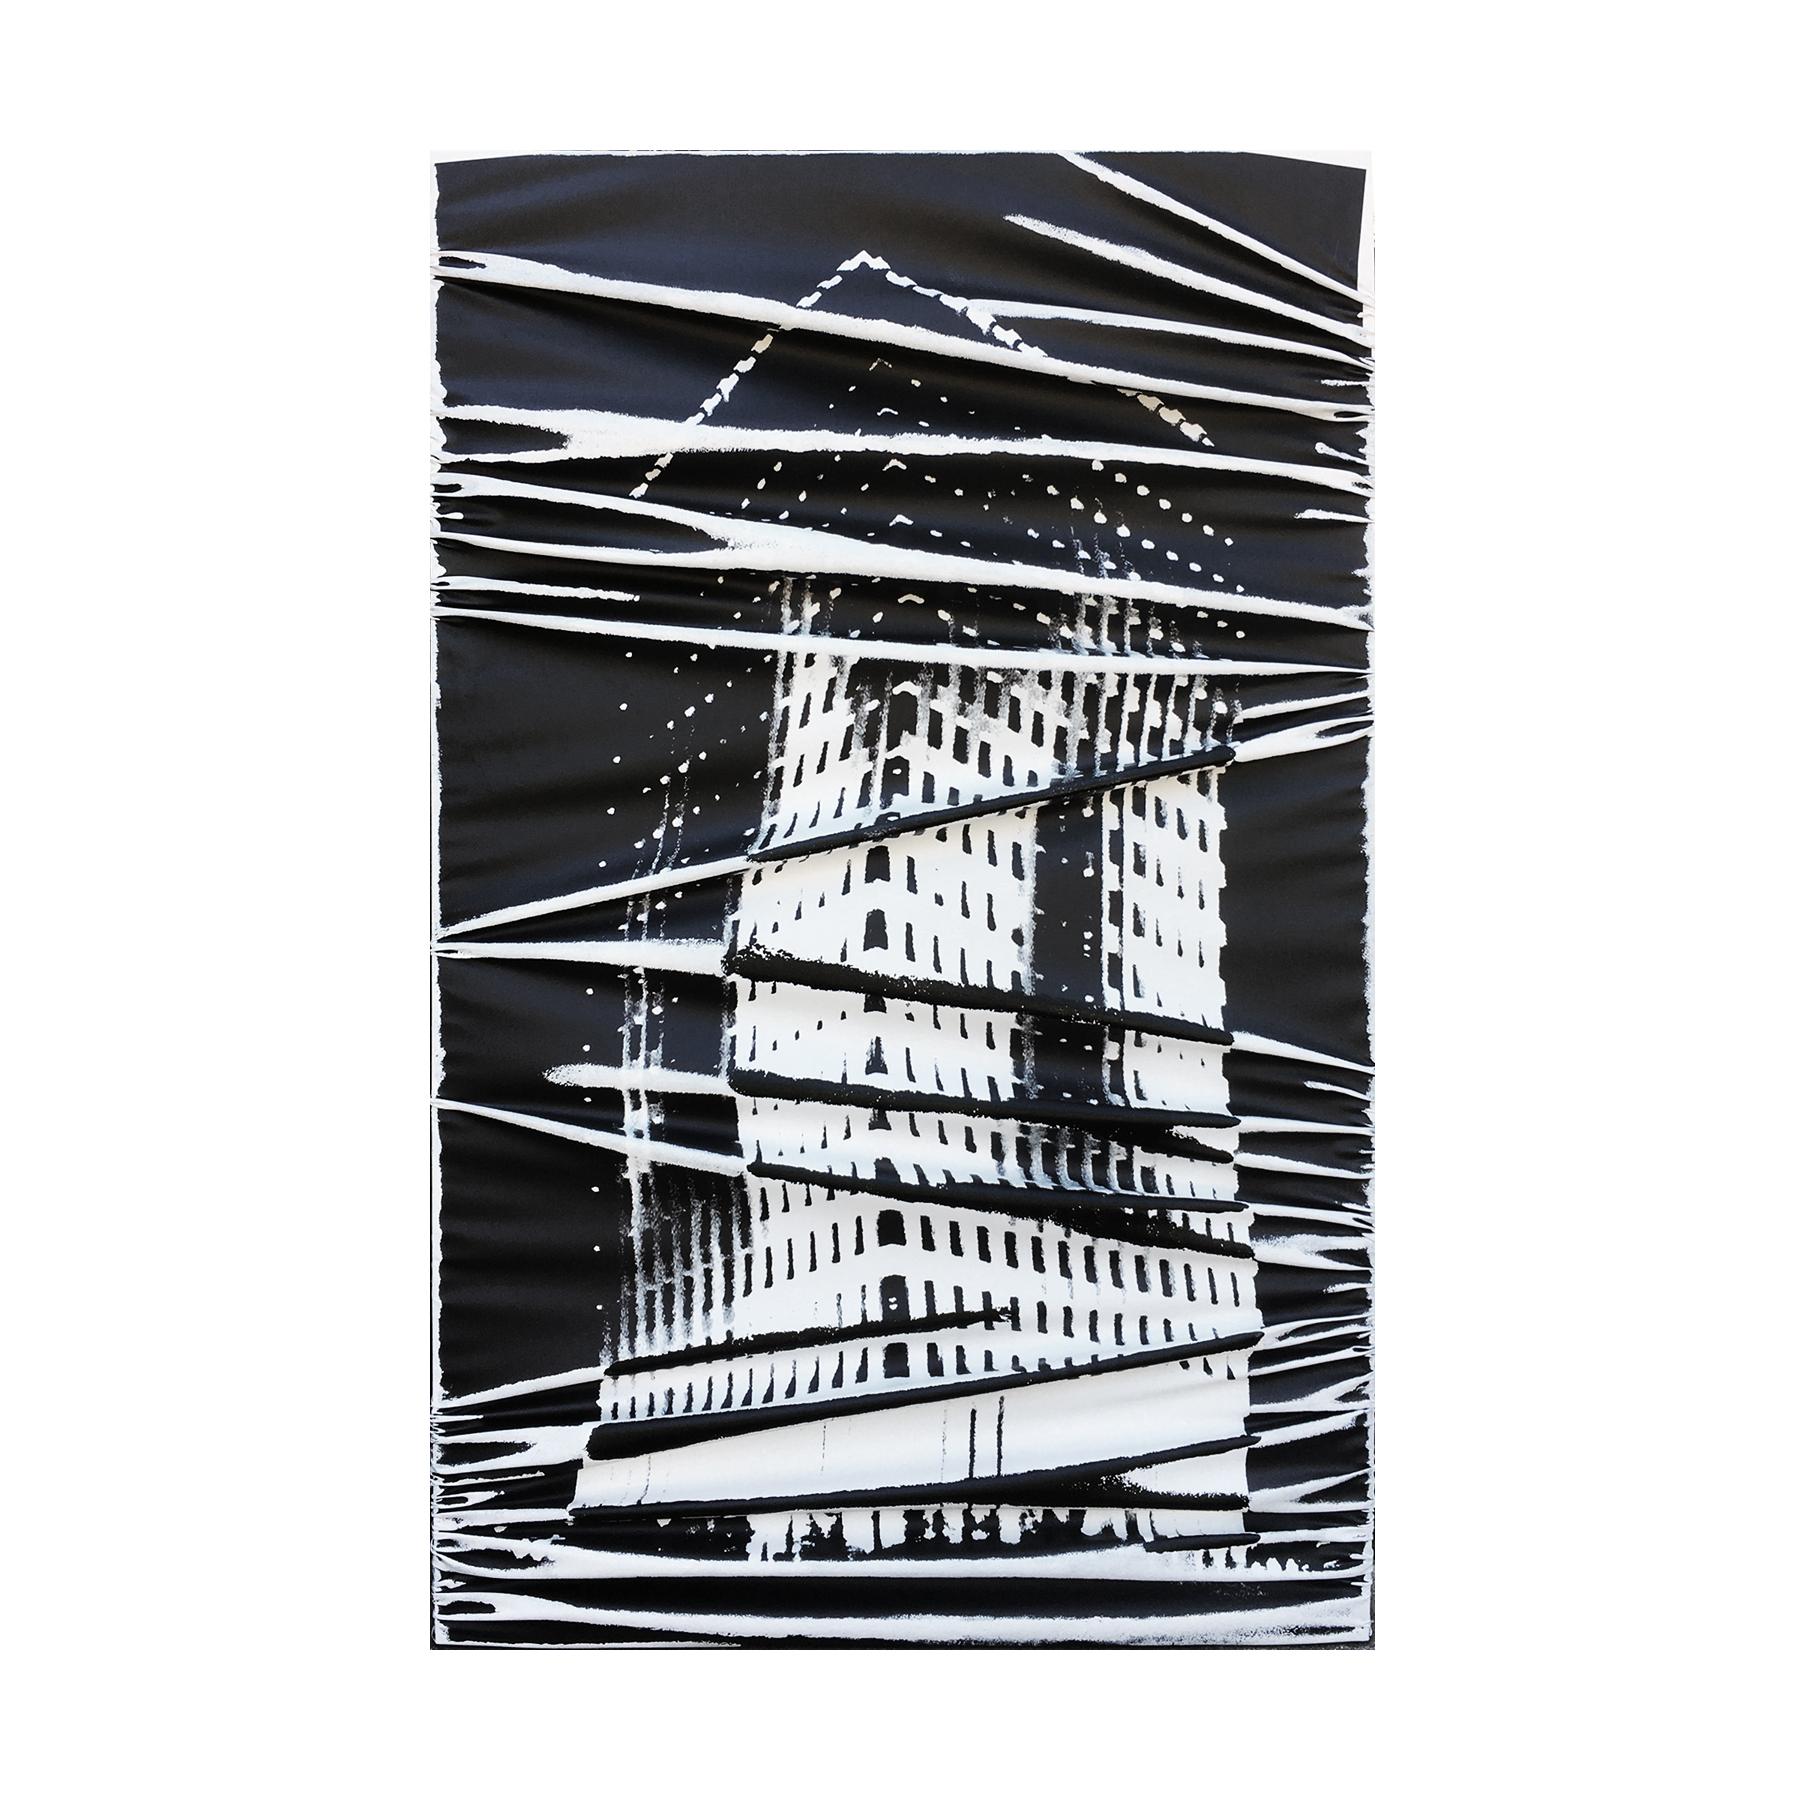 Black and white experimental abstract sculptural painting by Houston, TX artist Chris Bexar. The work depicts an architectural building painted with UV ink and acrylic on canvas. The piece is signed, titled, and dated by the artist.